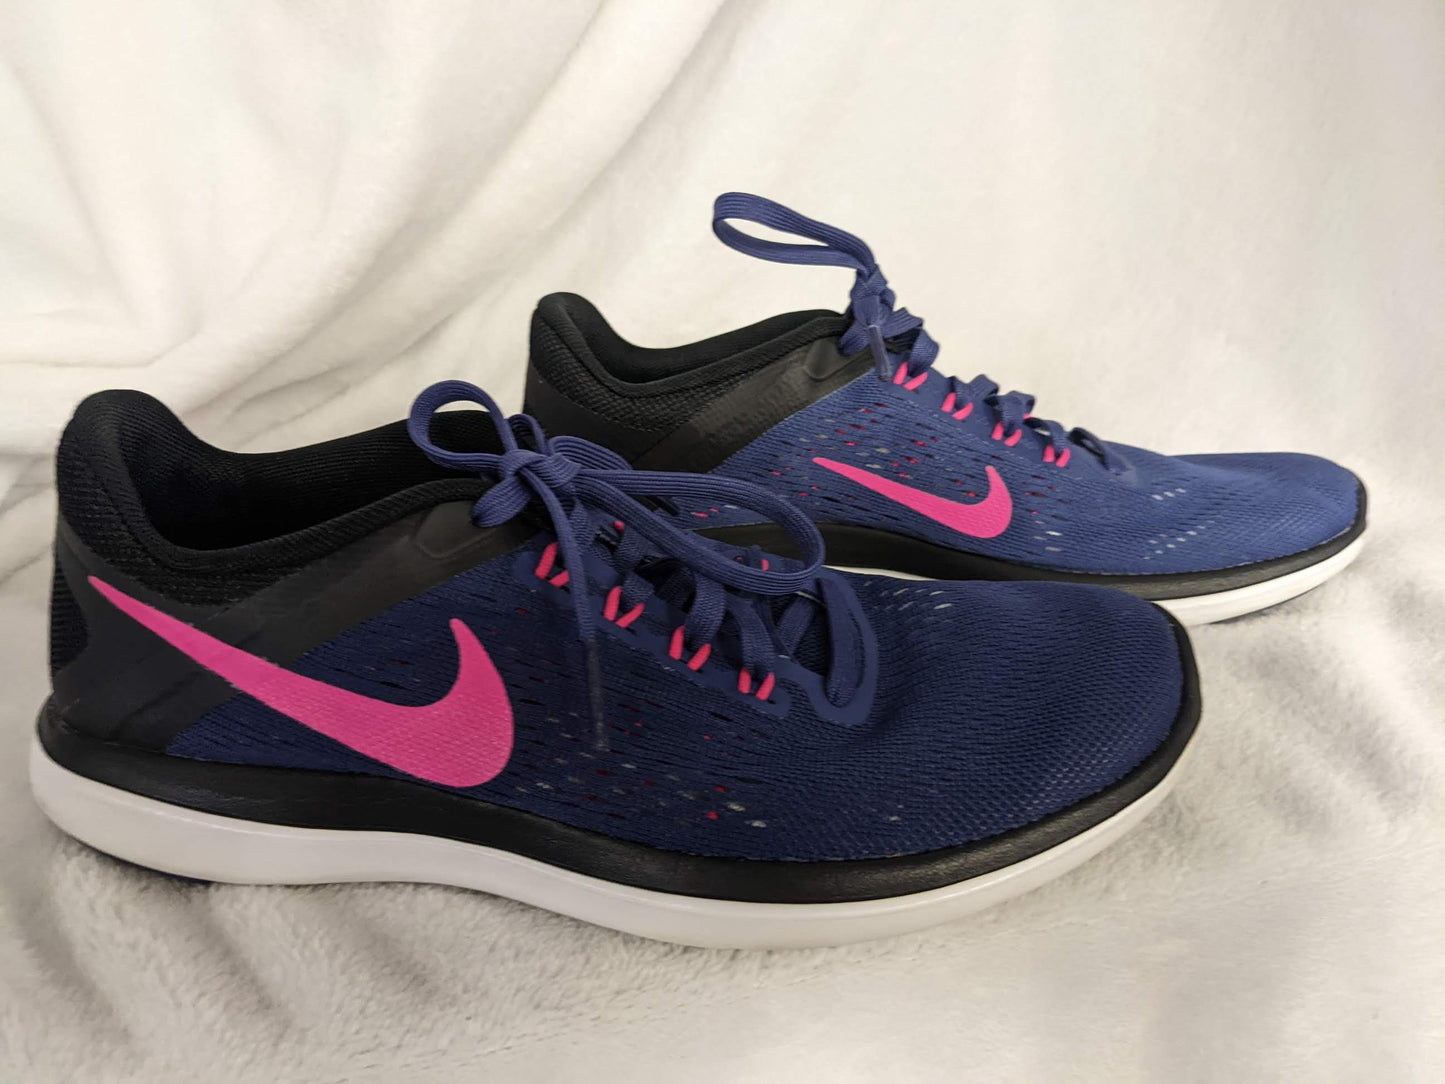 Nike FitSole Women's Athletic Shoes Size Women's 7 Color Blue Condition Used